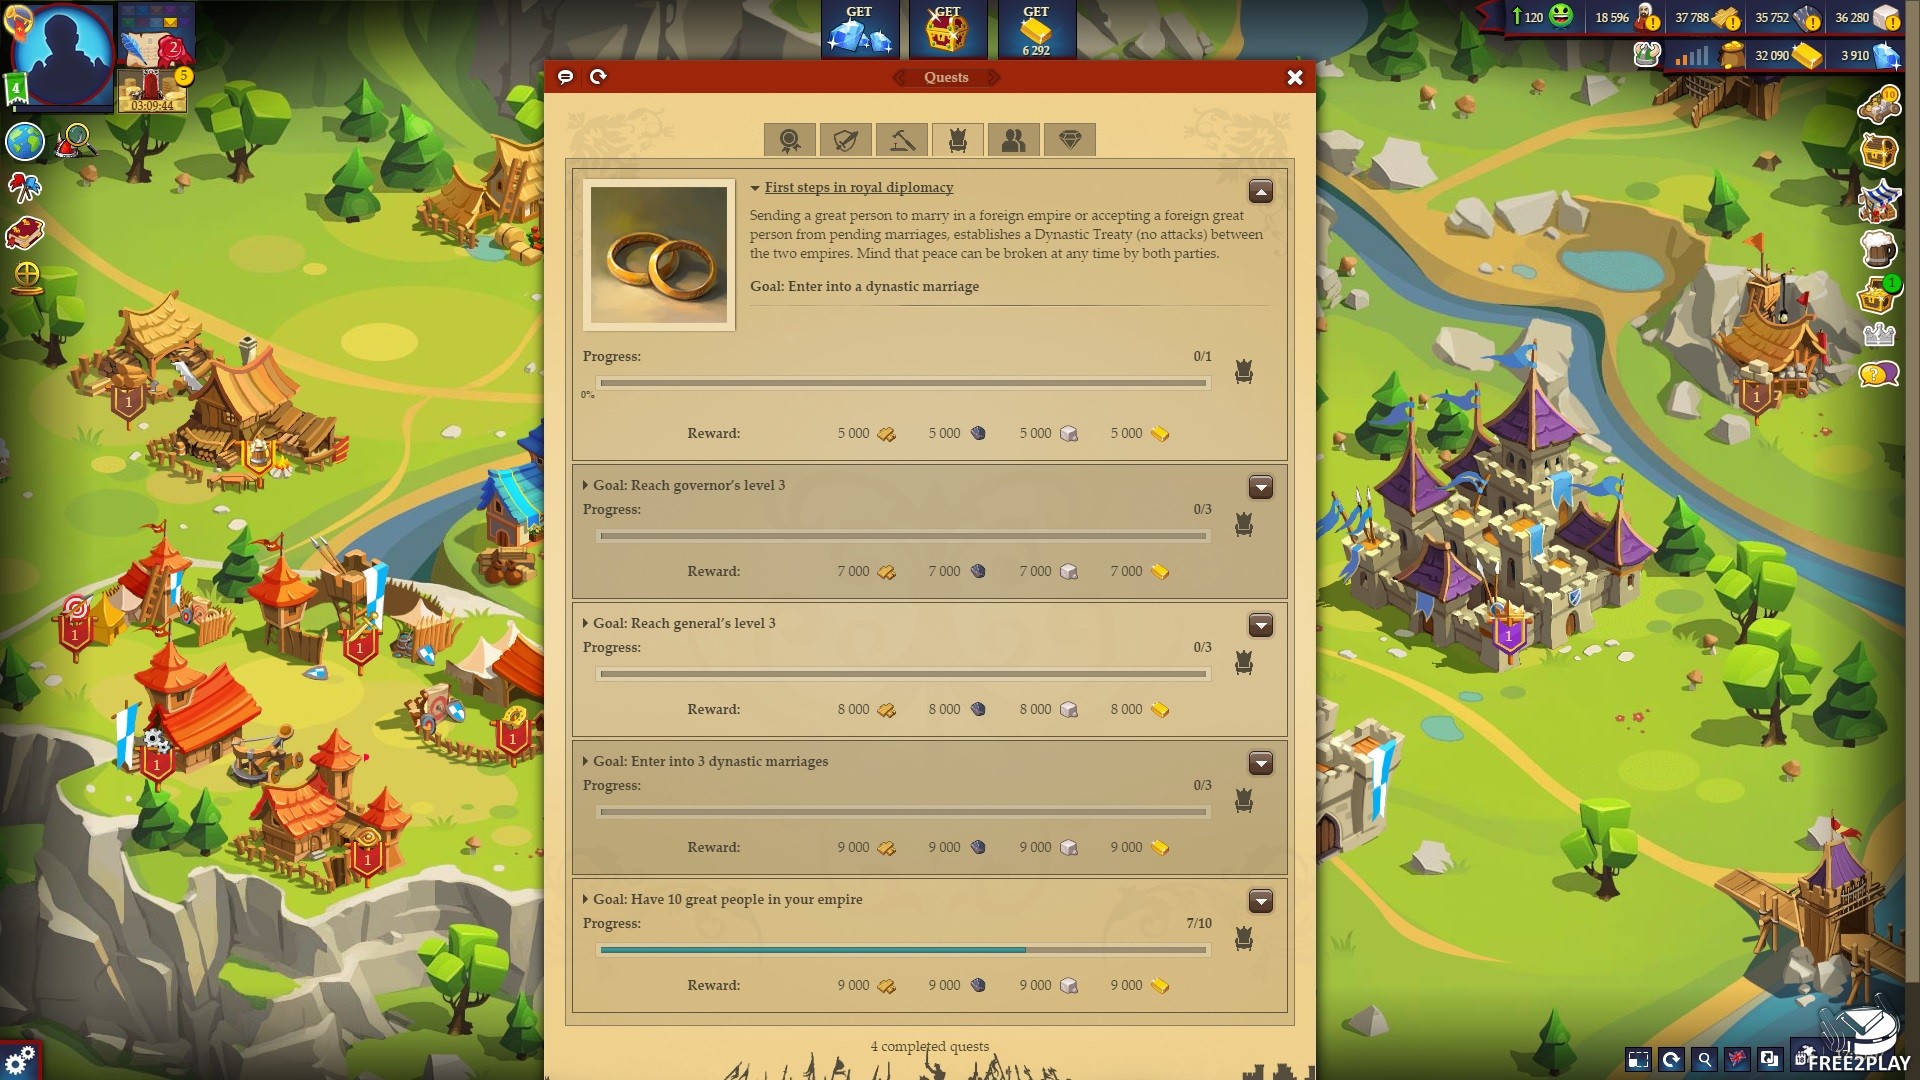 Game of Emperors Game - Free Download